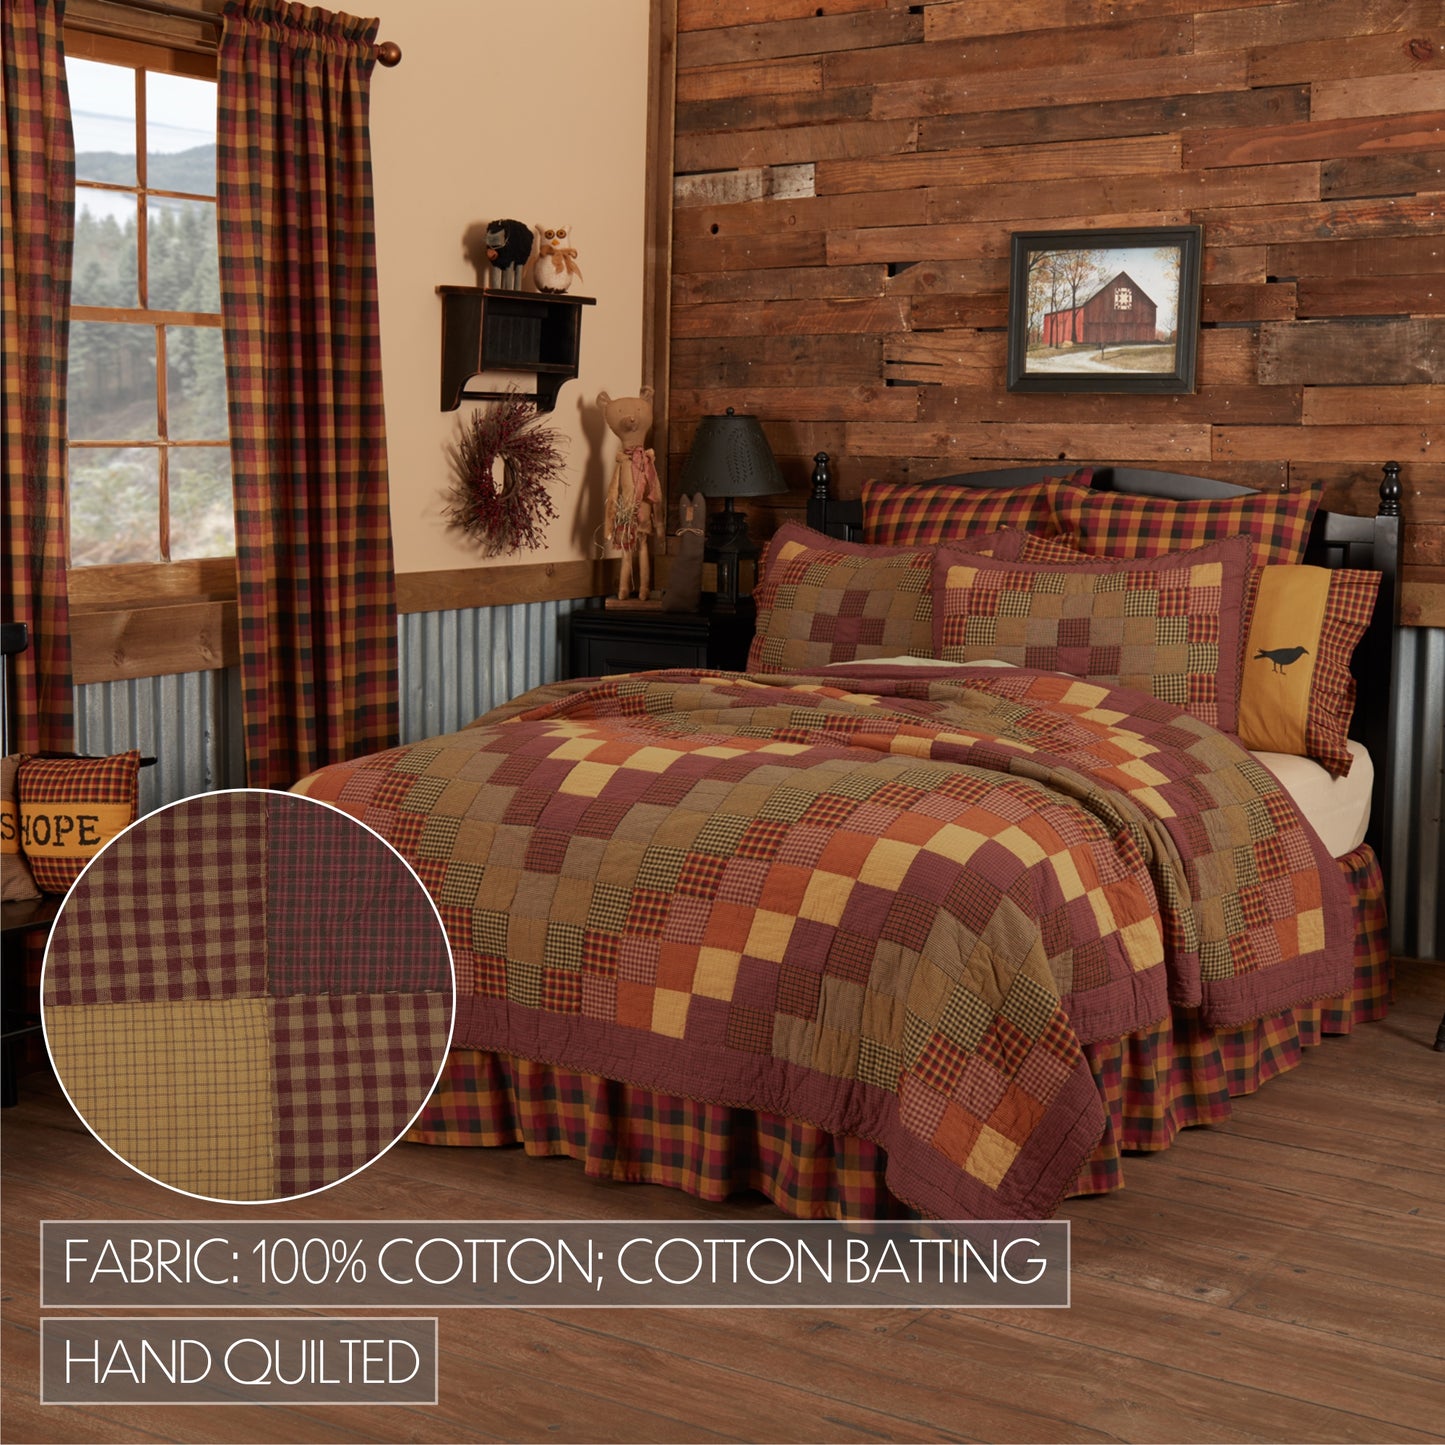 37904-Heritage-Farms-Luxury-King-Quilt-120Wx105L-image-2